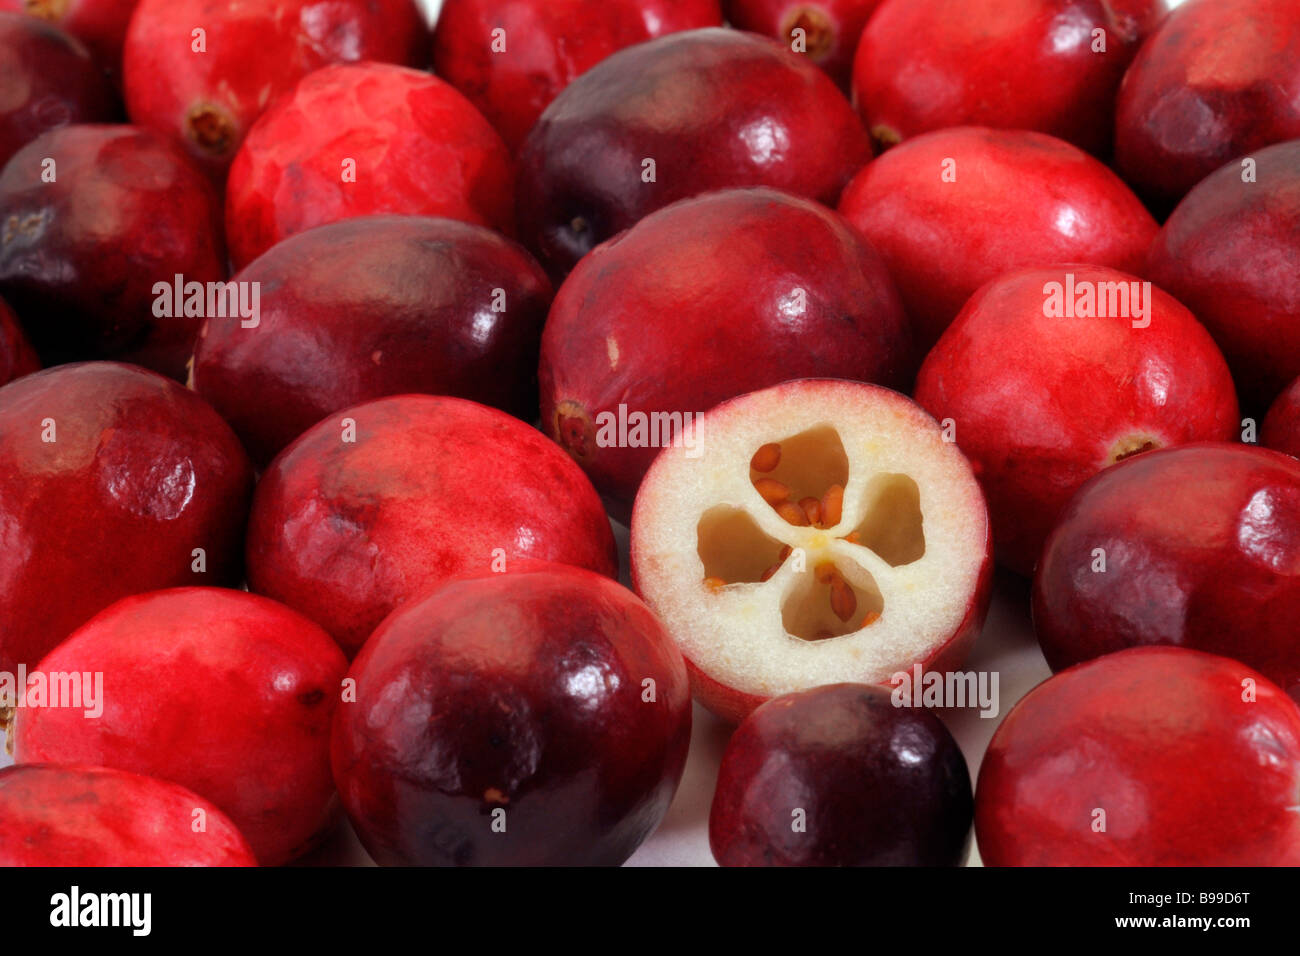 American Cranberry (Vaccinium macrocarpon, Oxycoccus macrocarpus). Whole berries with one halved berry seen from above Stock Photo